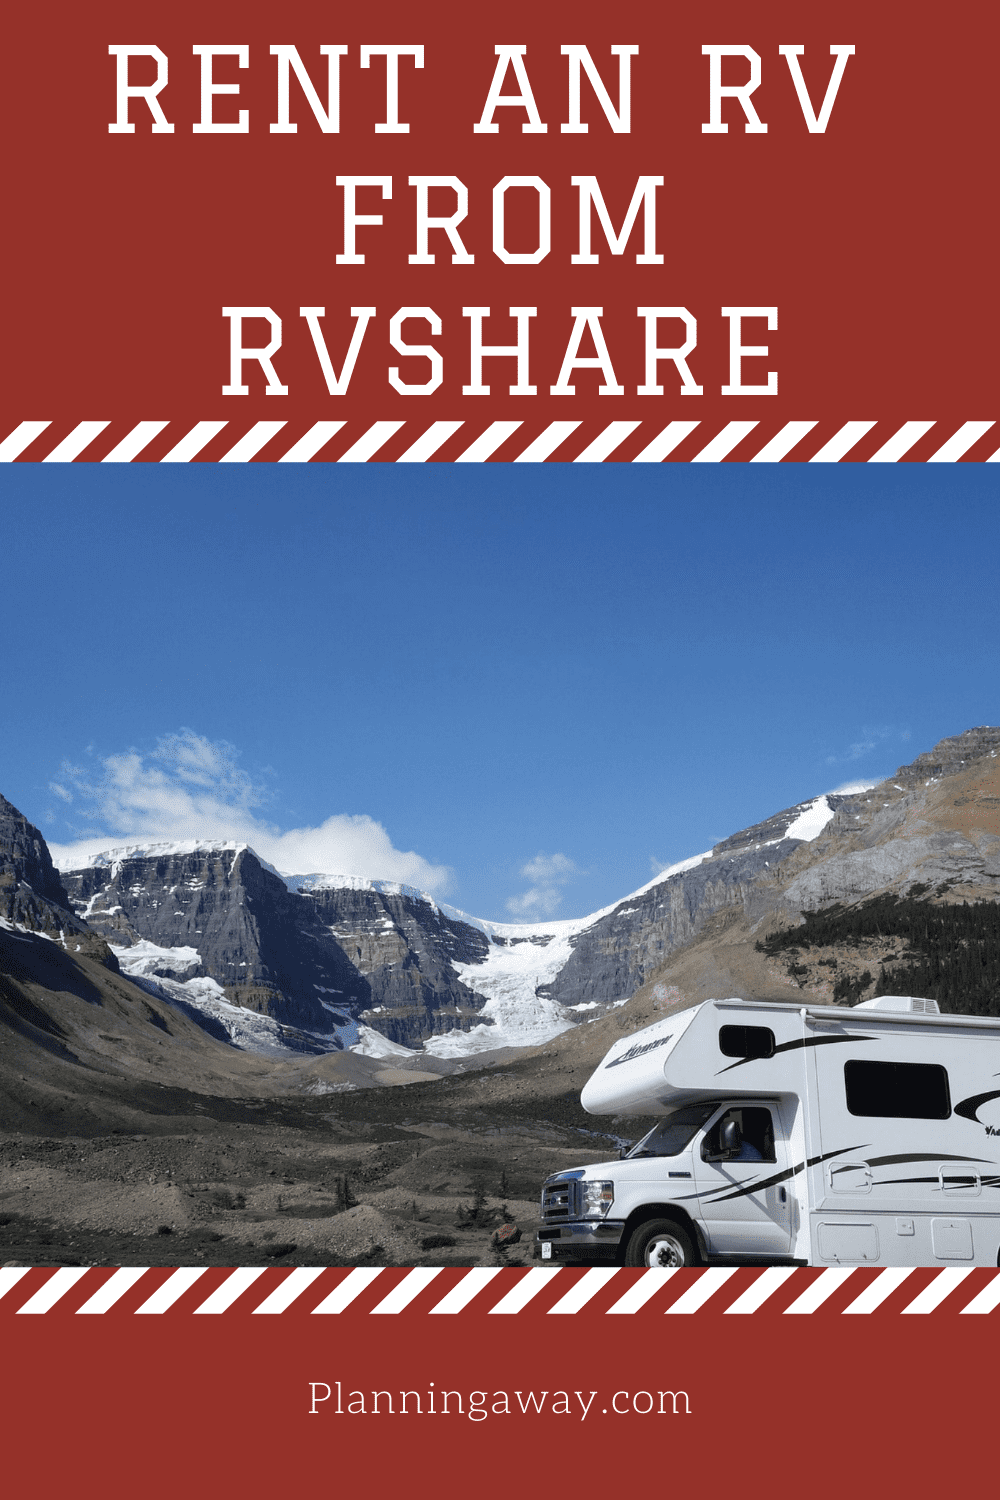 Rent and RV on RVshare